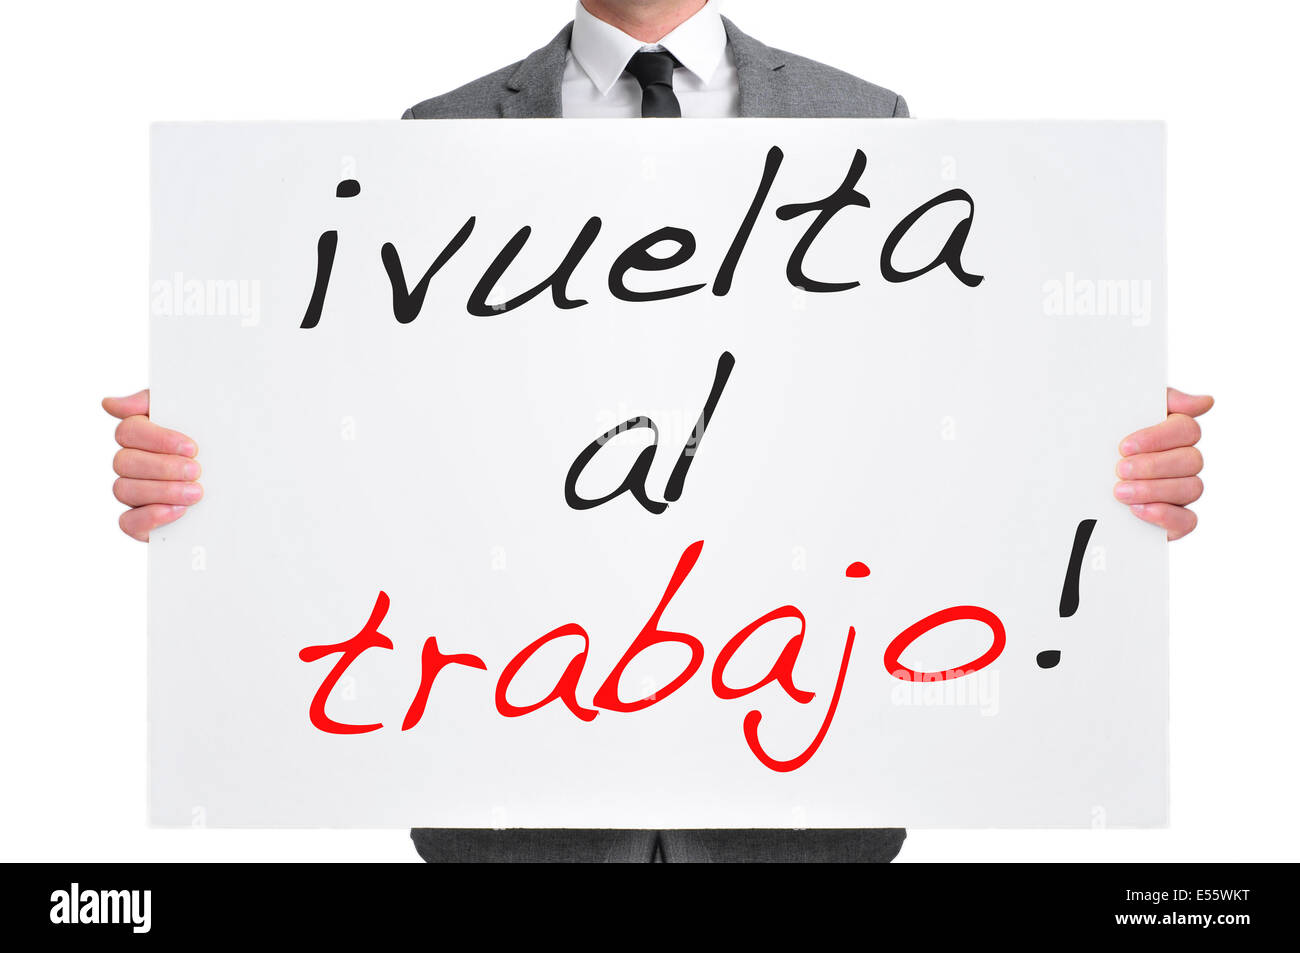 businessman holding a signboard with the text vuelta al trabajo, back to work in spanish, written in it Stock Photo